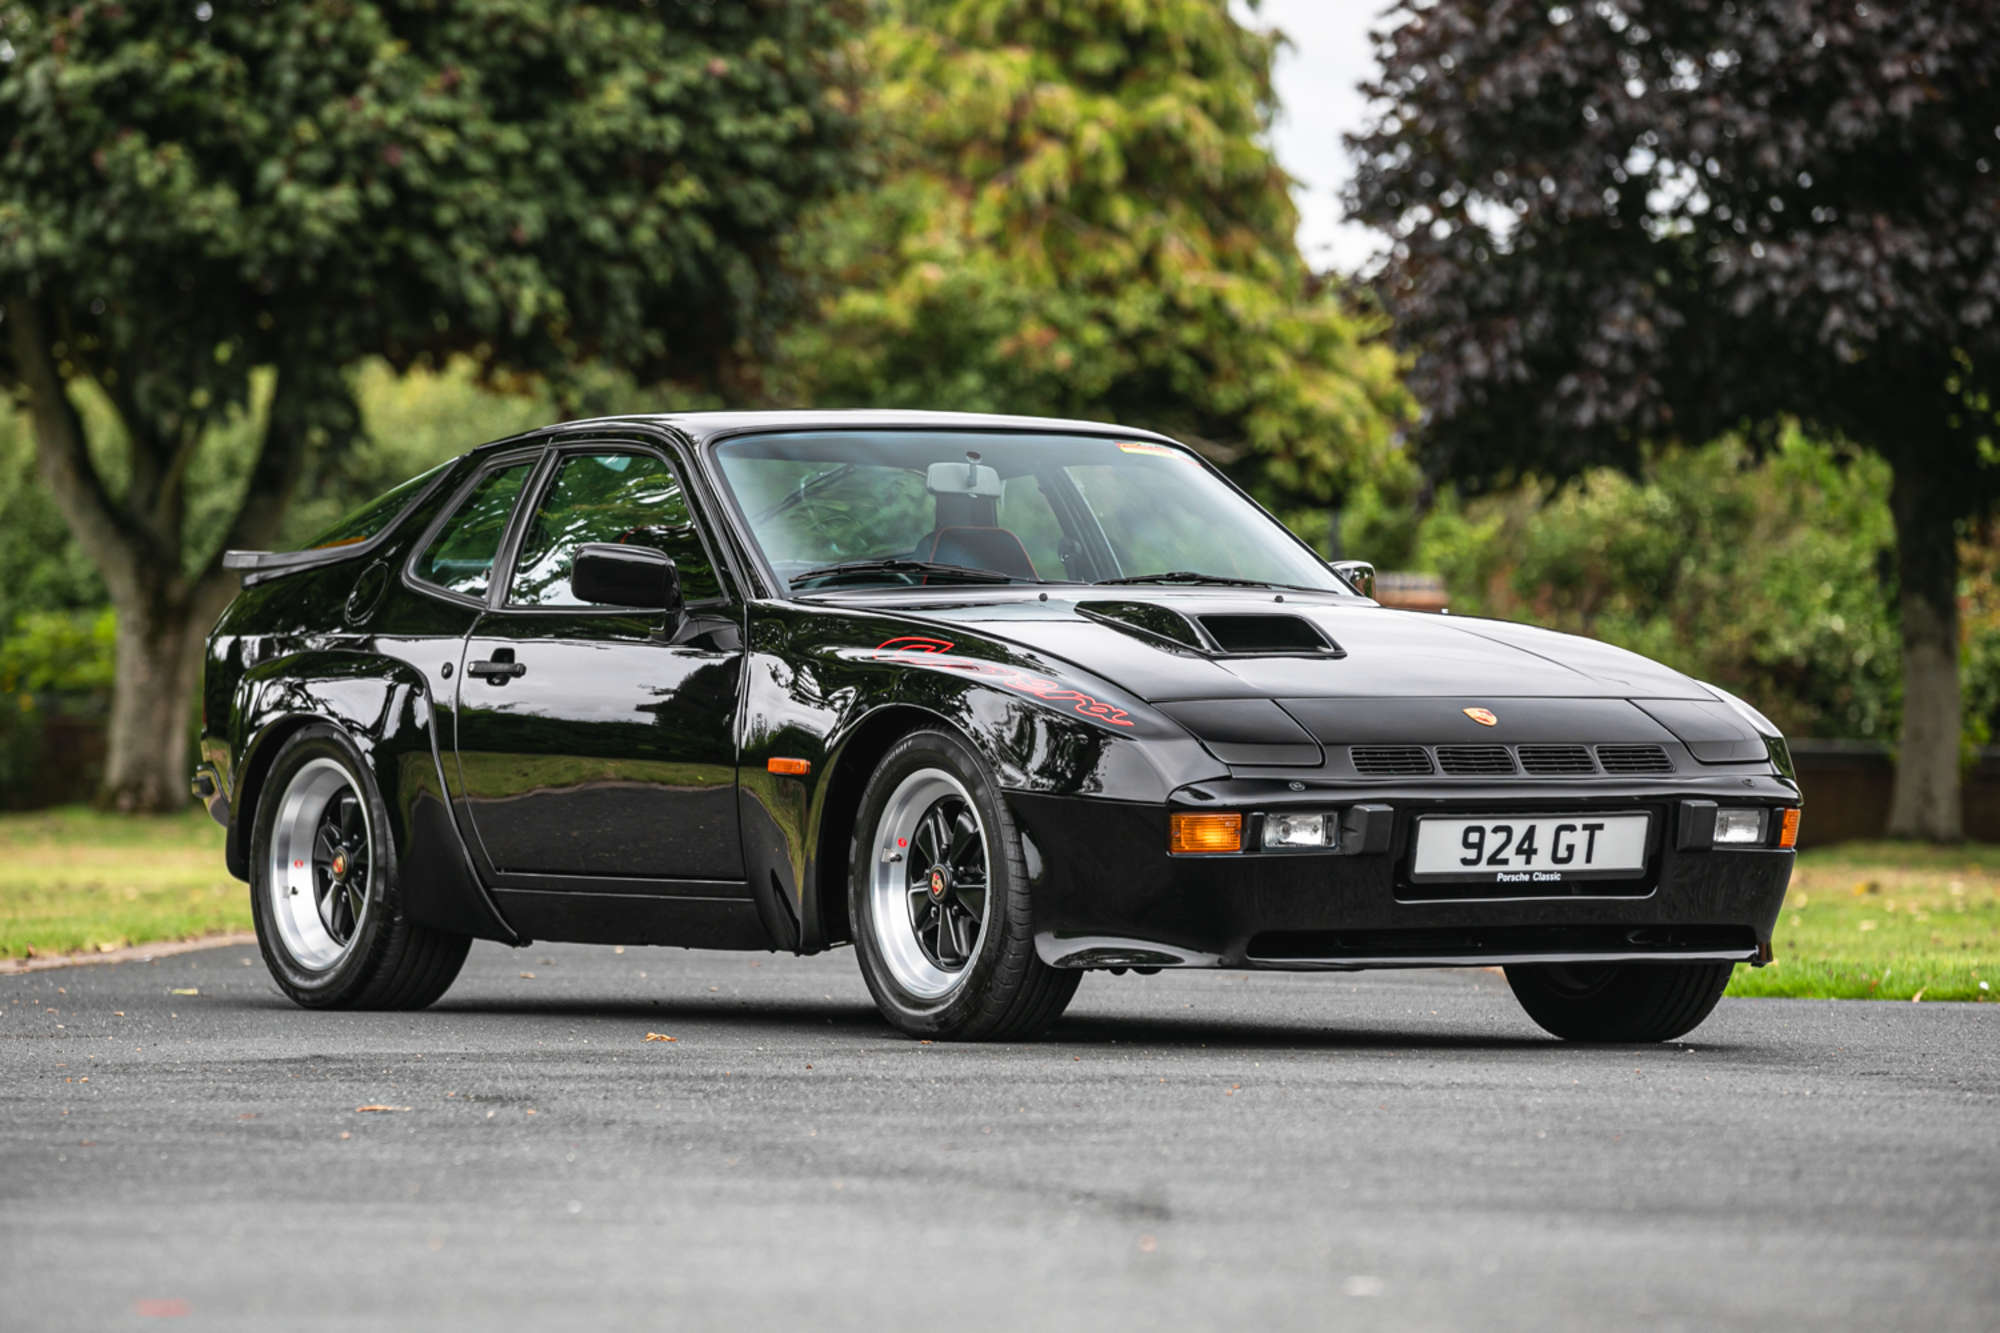 Black Rose: Rockstar manager's 924 Carrera GT up for auction | Hagerty UK